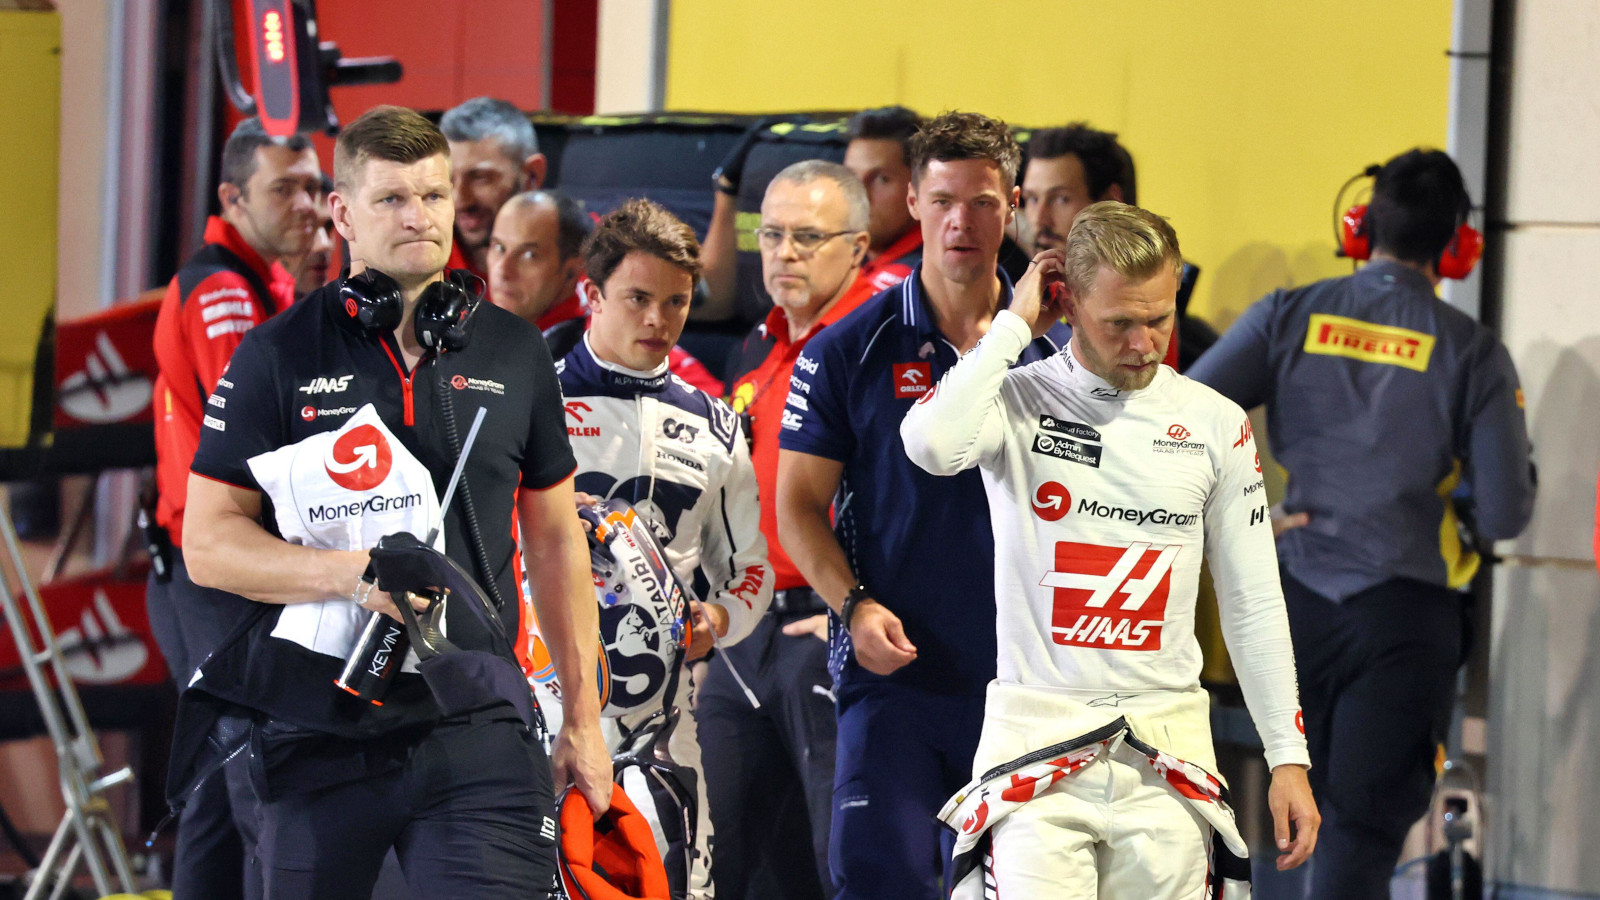 Kevin Magnussen walking down the pit lane after qualifying exit. Bahrain March 2023